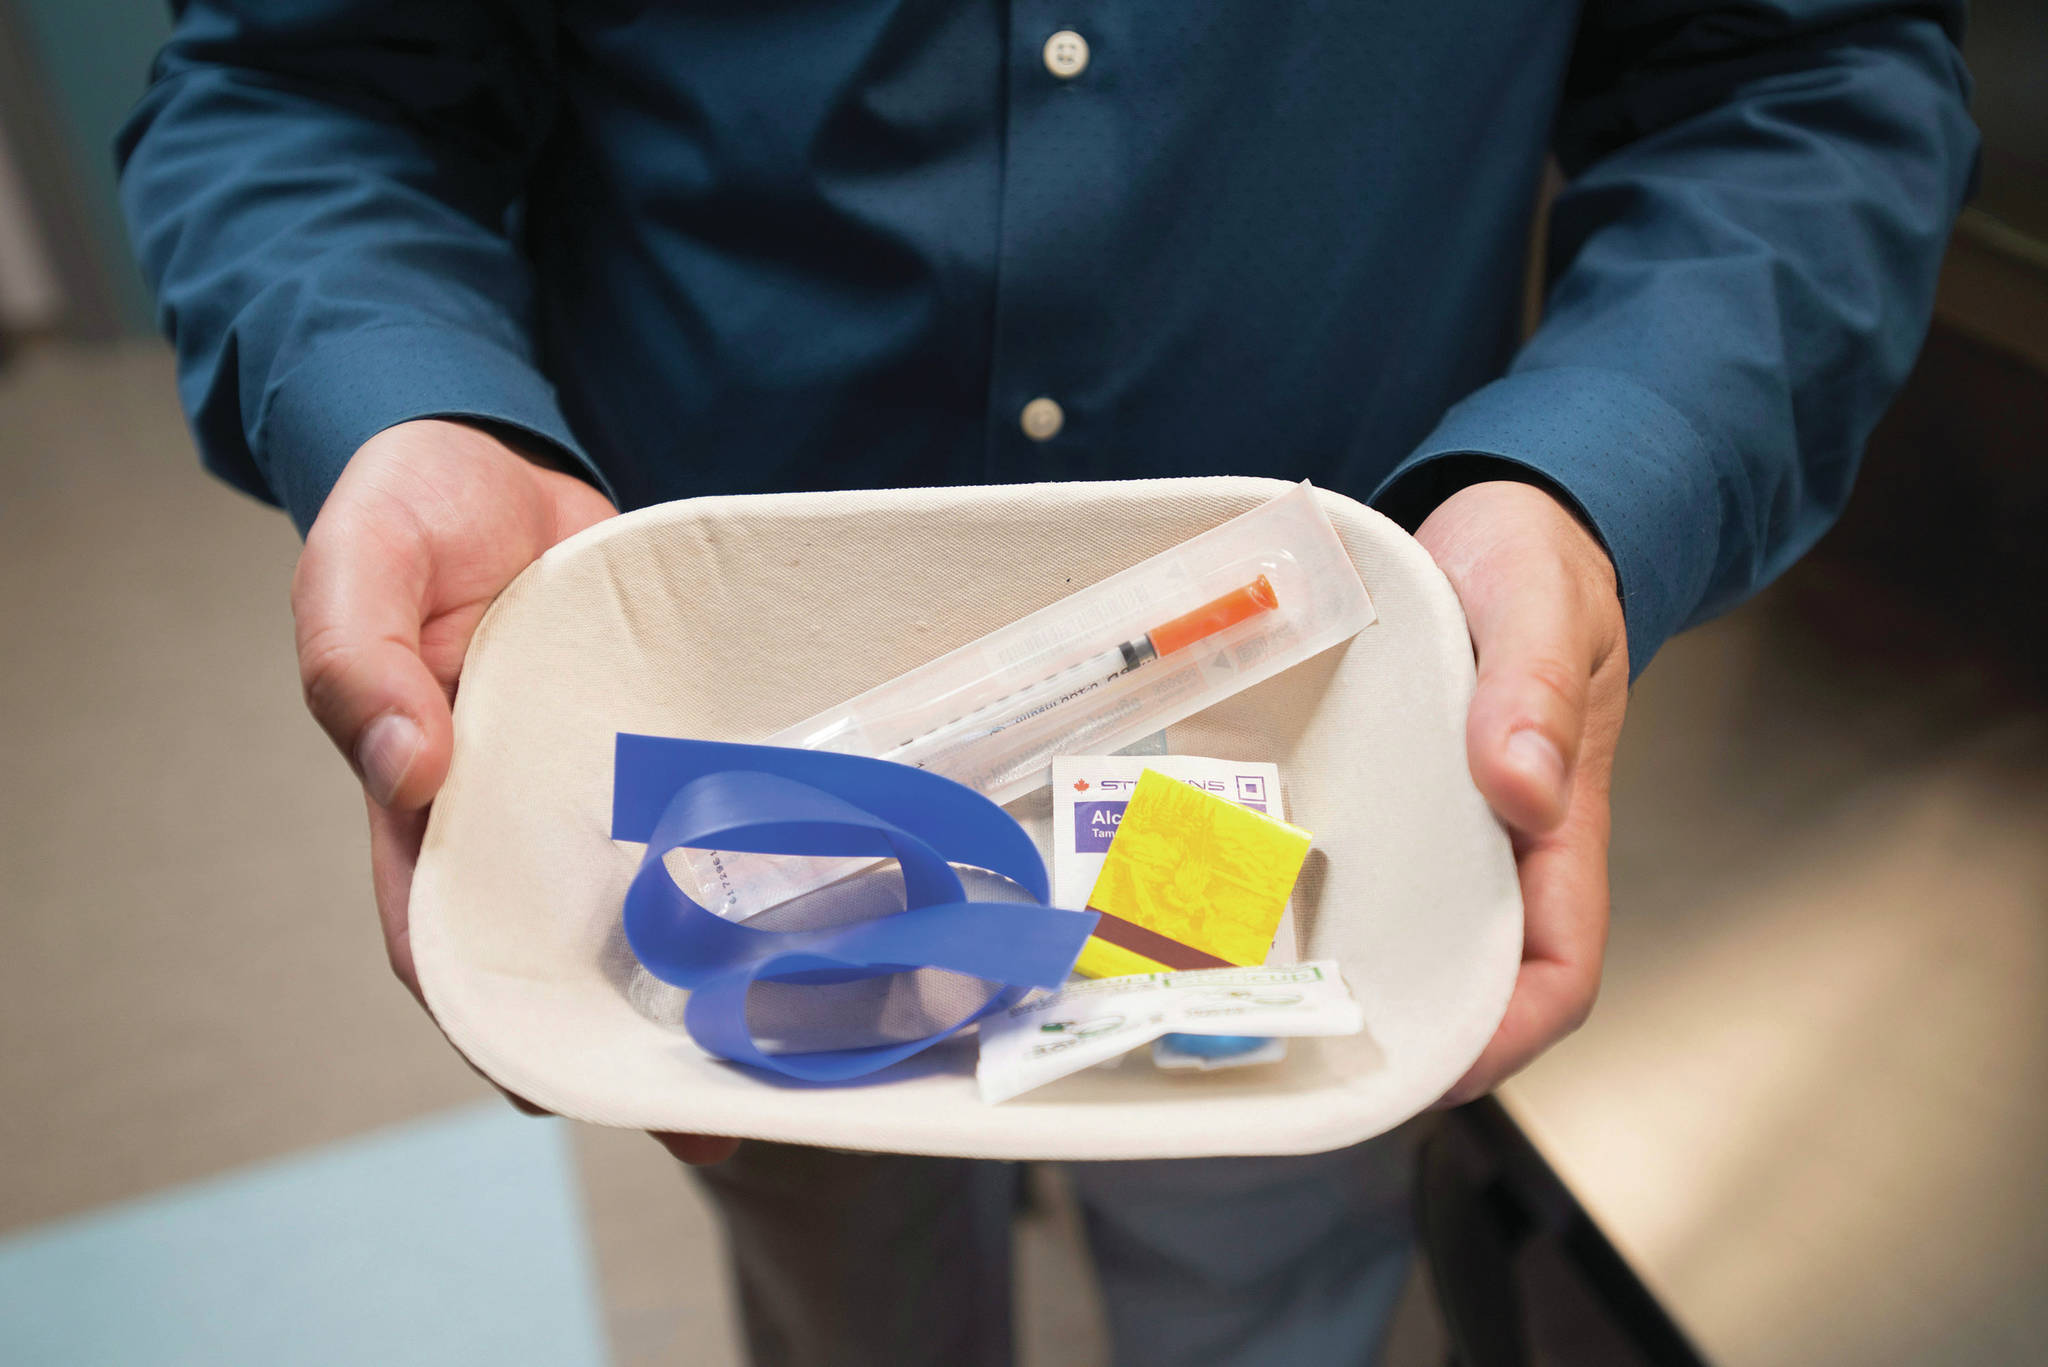 Naloxone kits to counteract opioid overdose are available to drug users in Red Deer while the province waits to determine if the city needs a supervised drug consumption site to respond to the opioid crisis. (File photo by Advocate staff)                                A injection kit. File photo